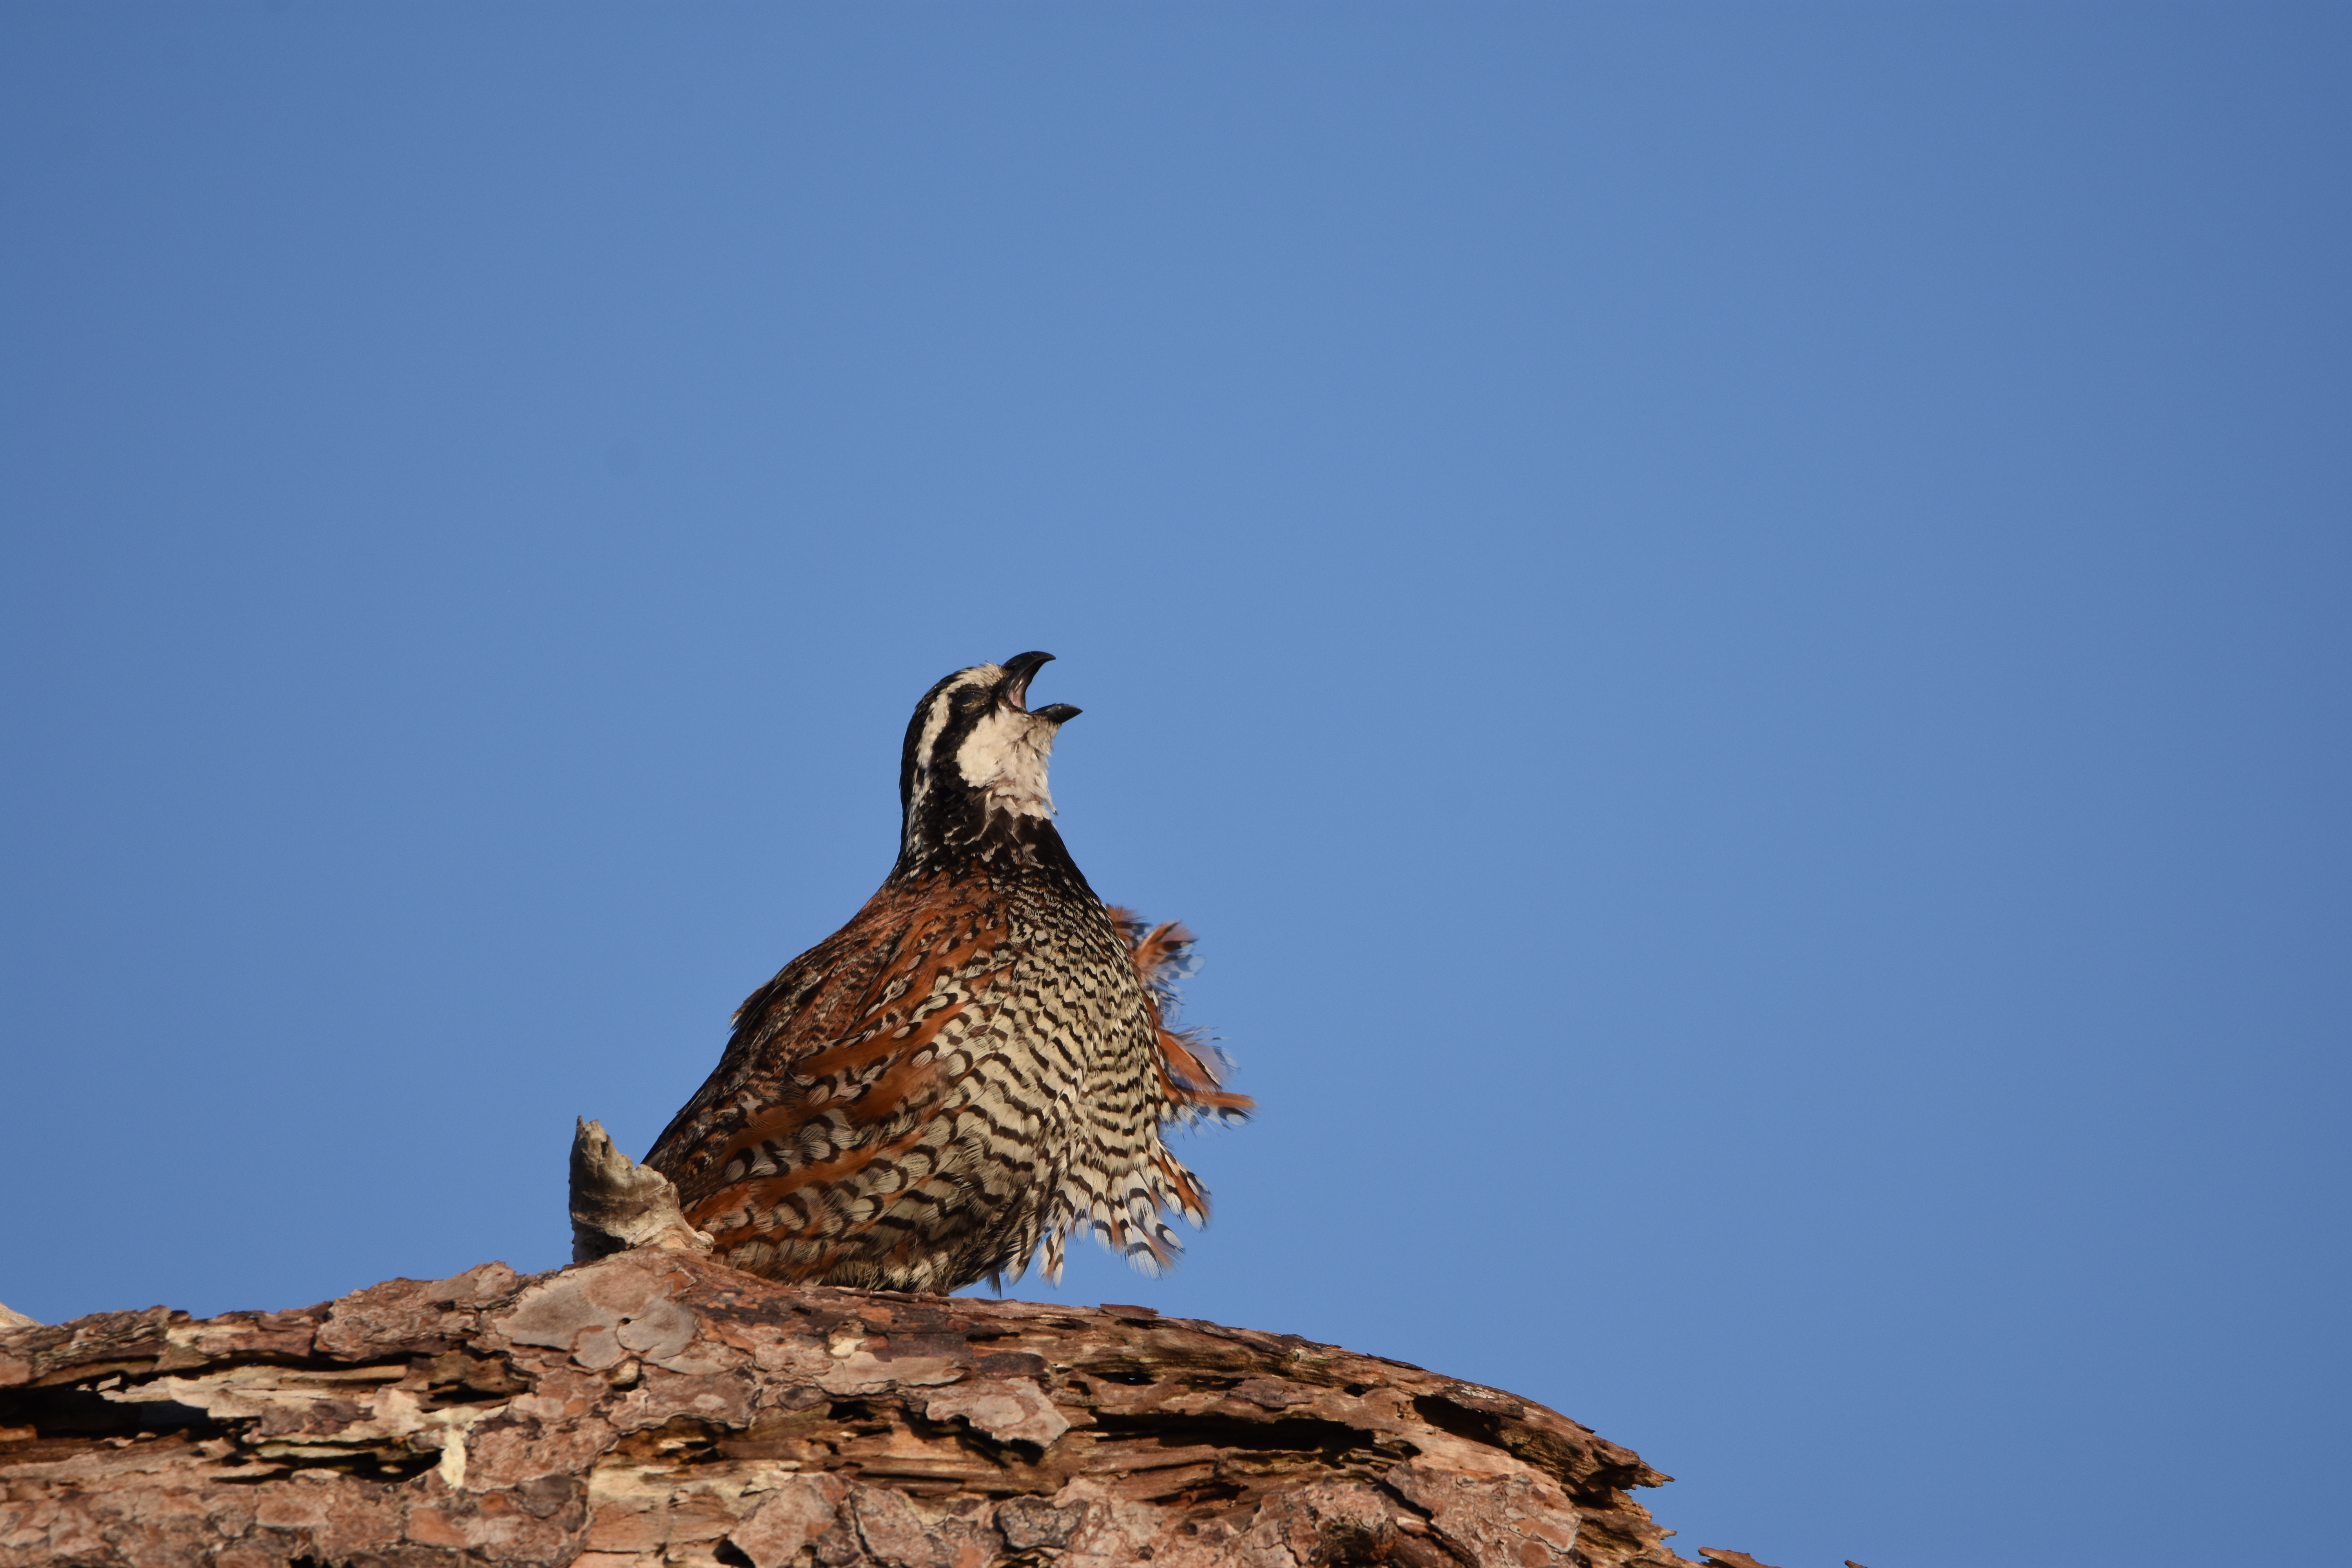 A Northern Bobwhite sits on a log and sings, with blue sky in the background.